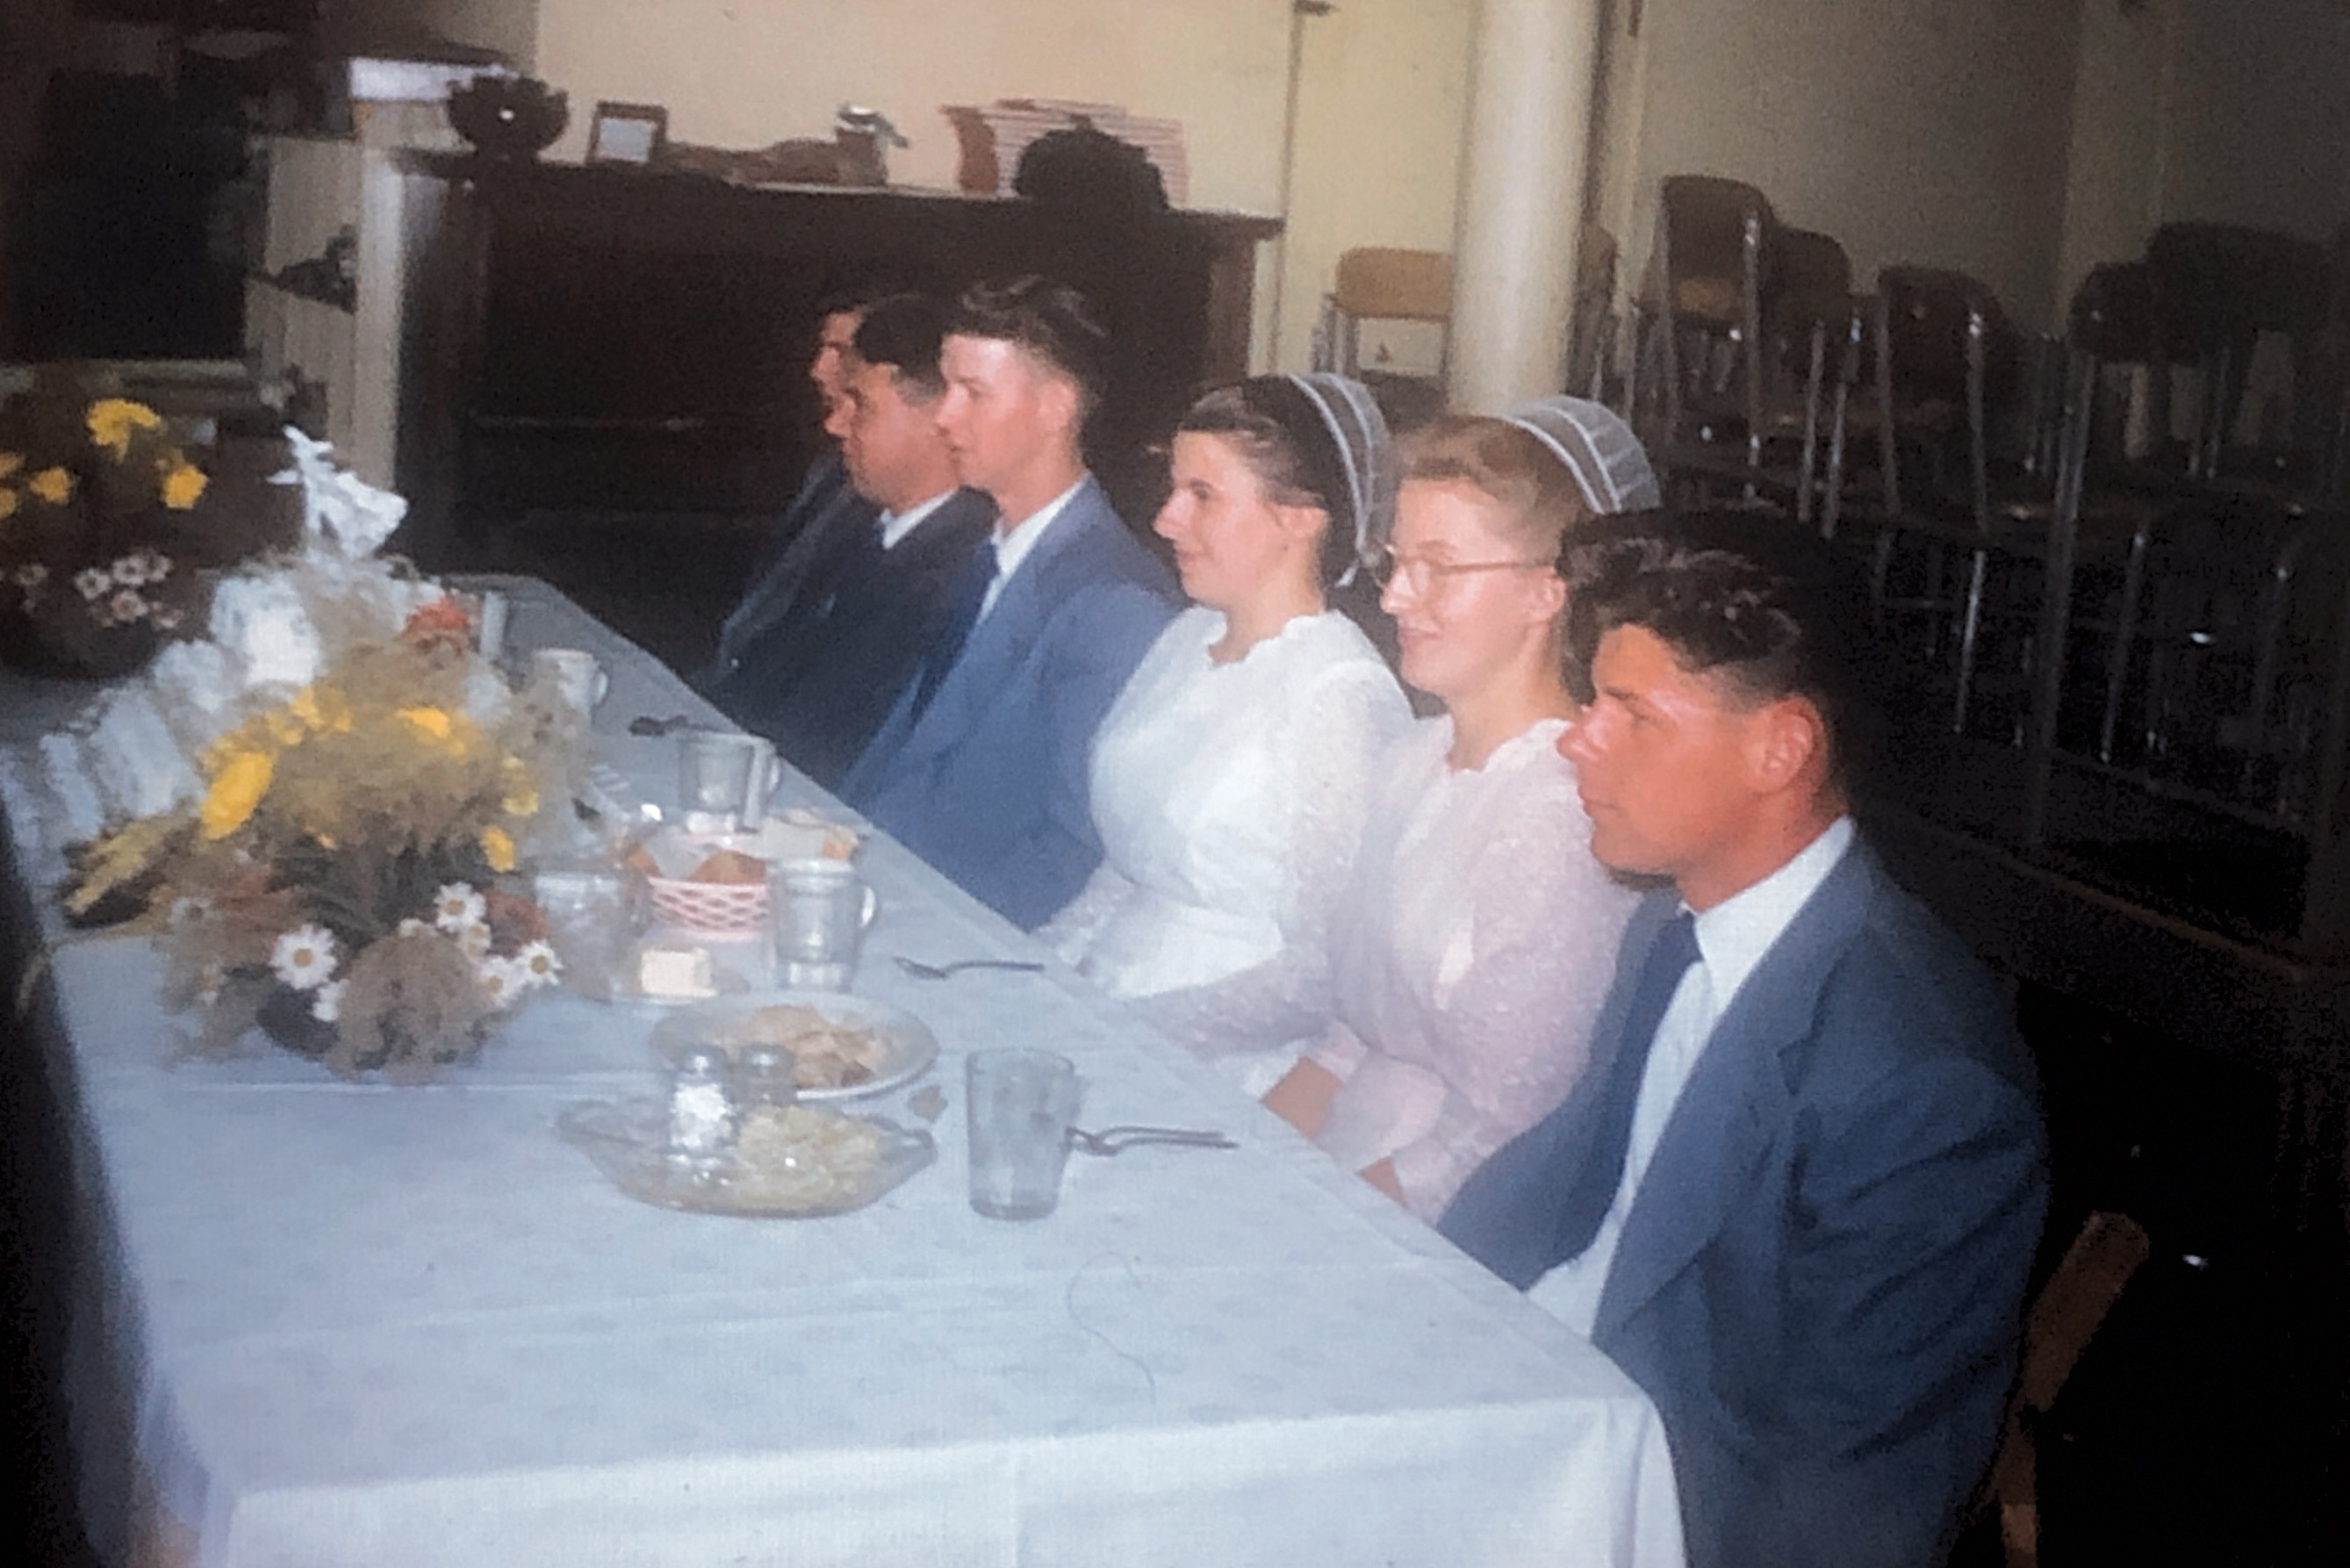 Mennonite wedding party circa 1950. My mother Thelma second from the right an my father John 5th from the right. Note the white “coverings” on the women. 